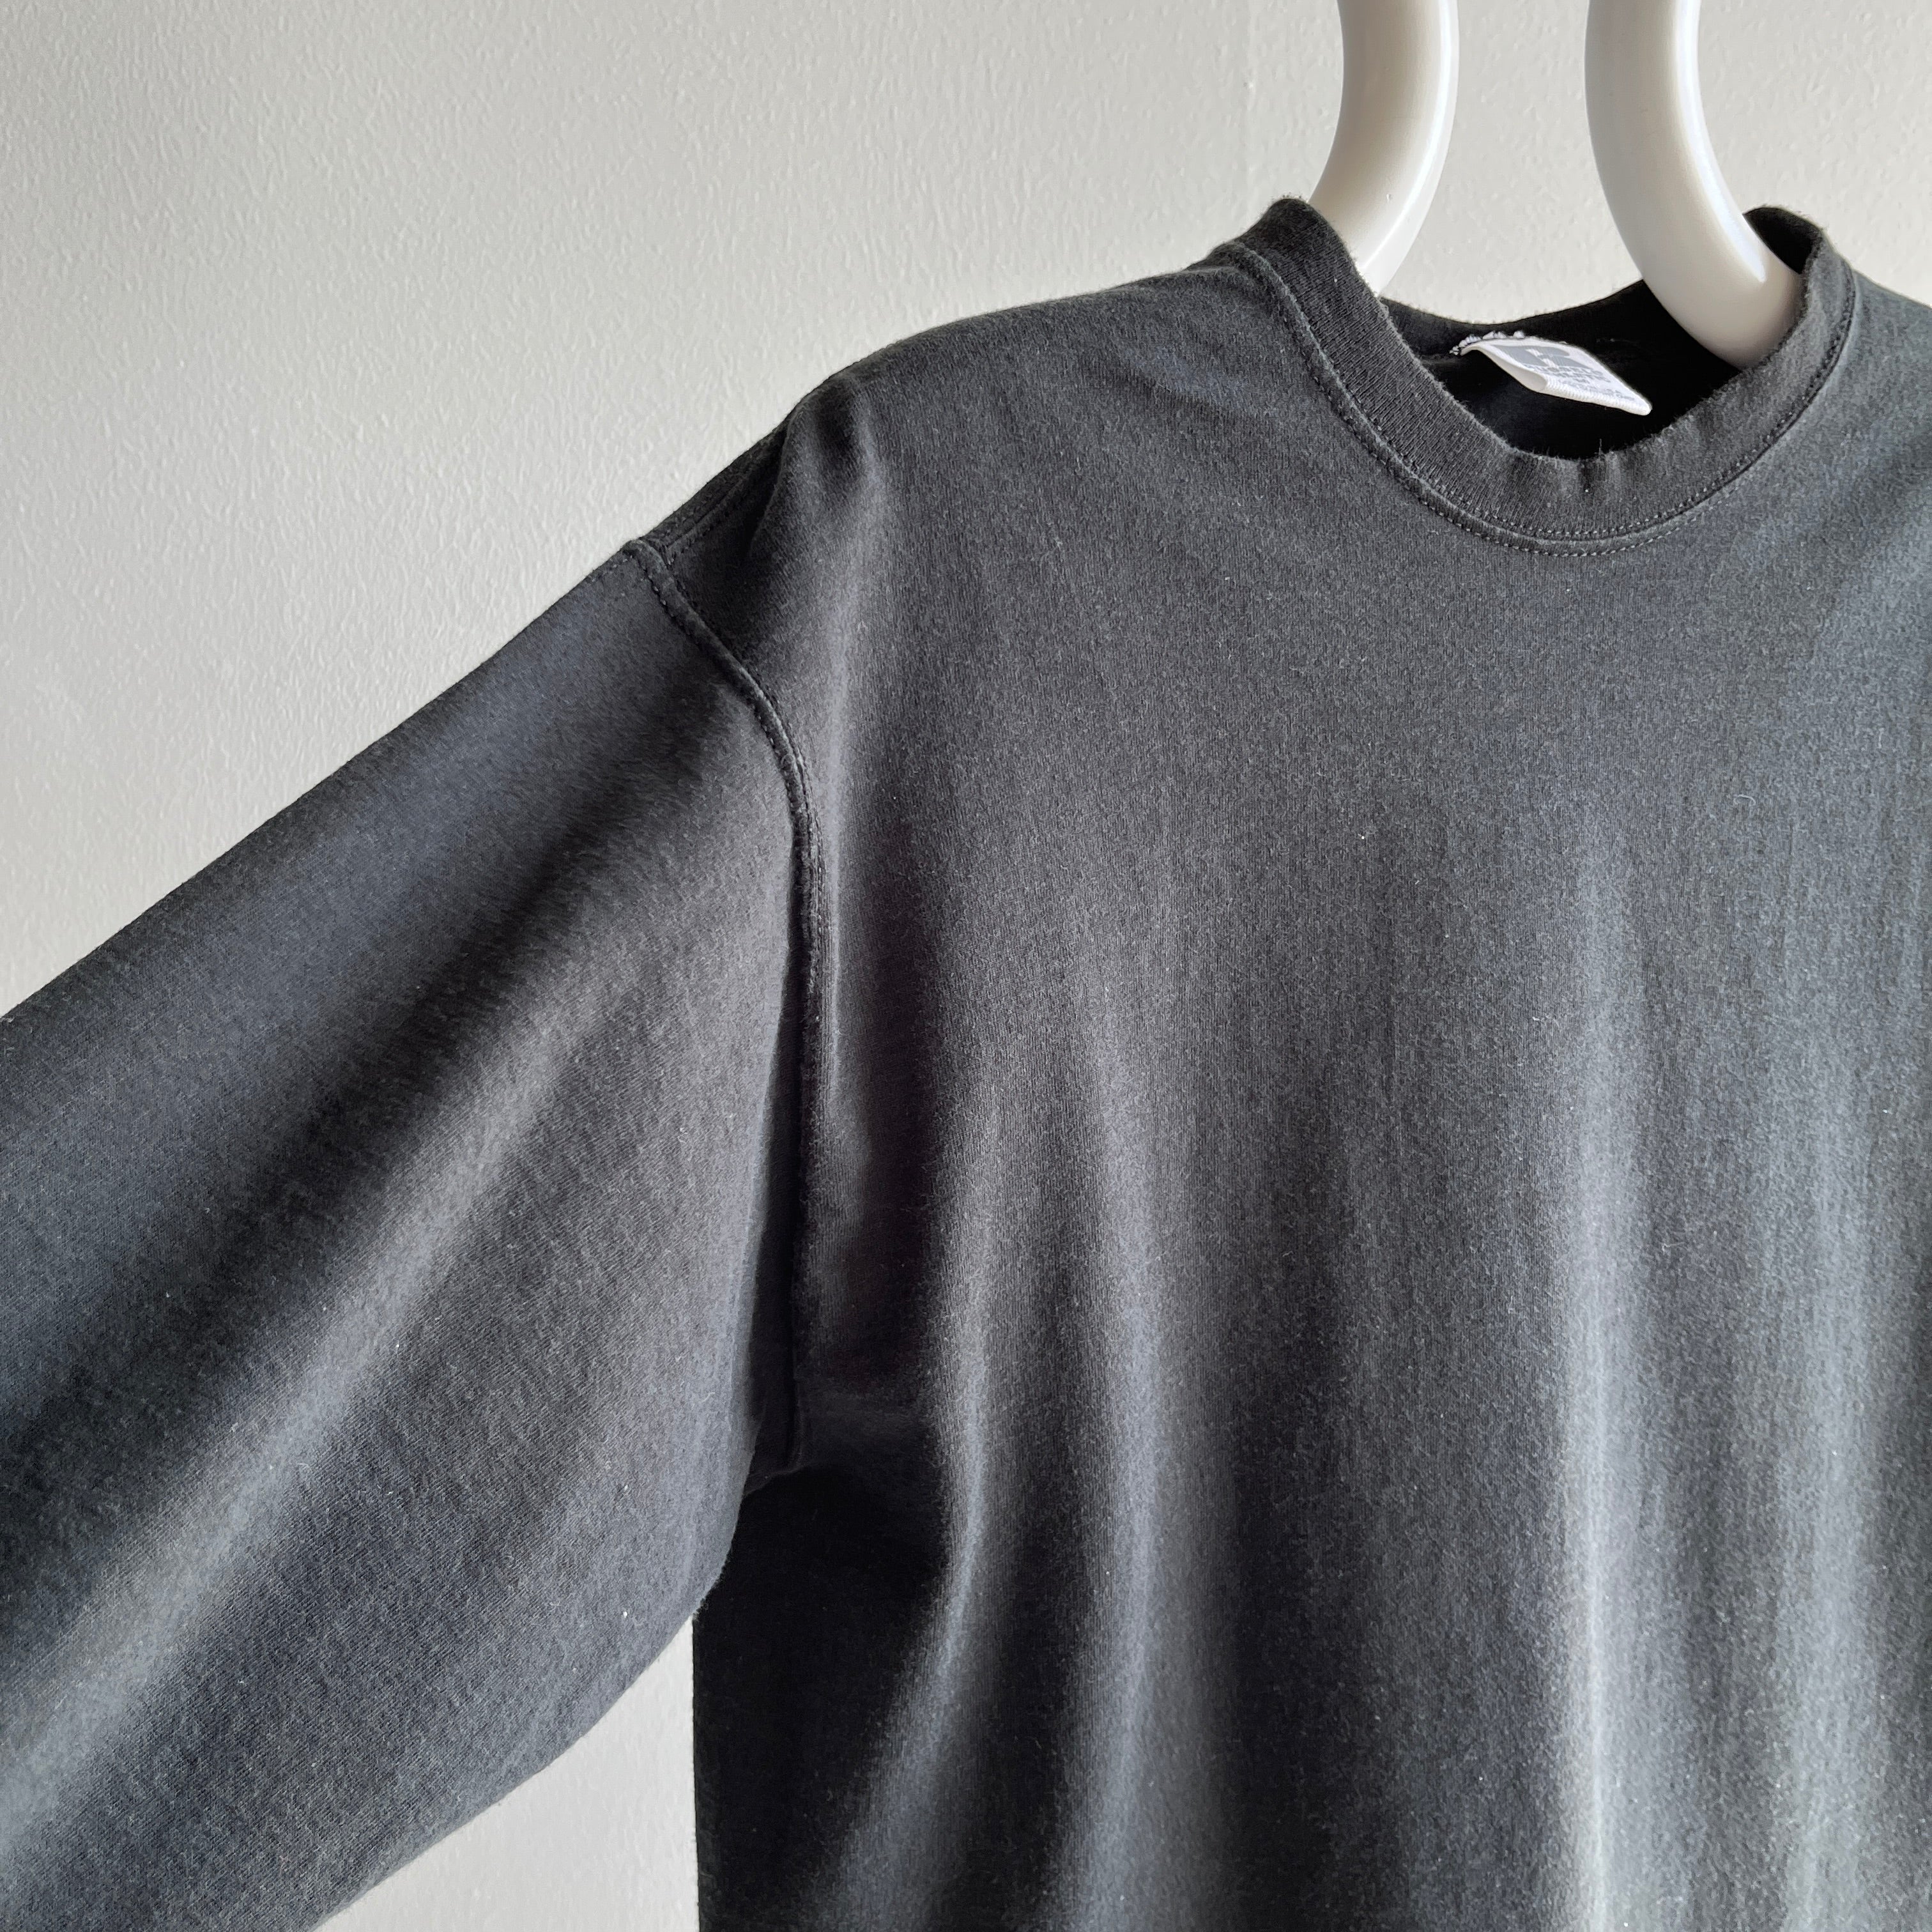 1990s USA Made Blank Black Long Sleeve Cotton T-Shirt by Russell